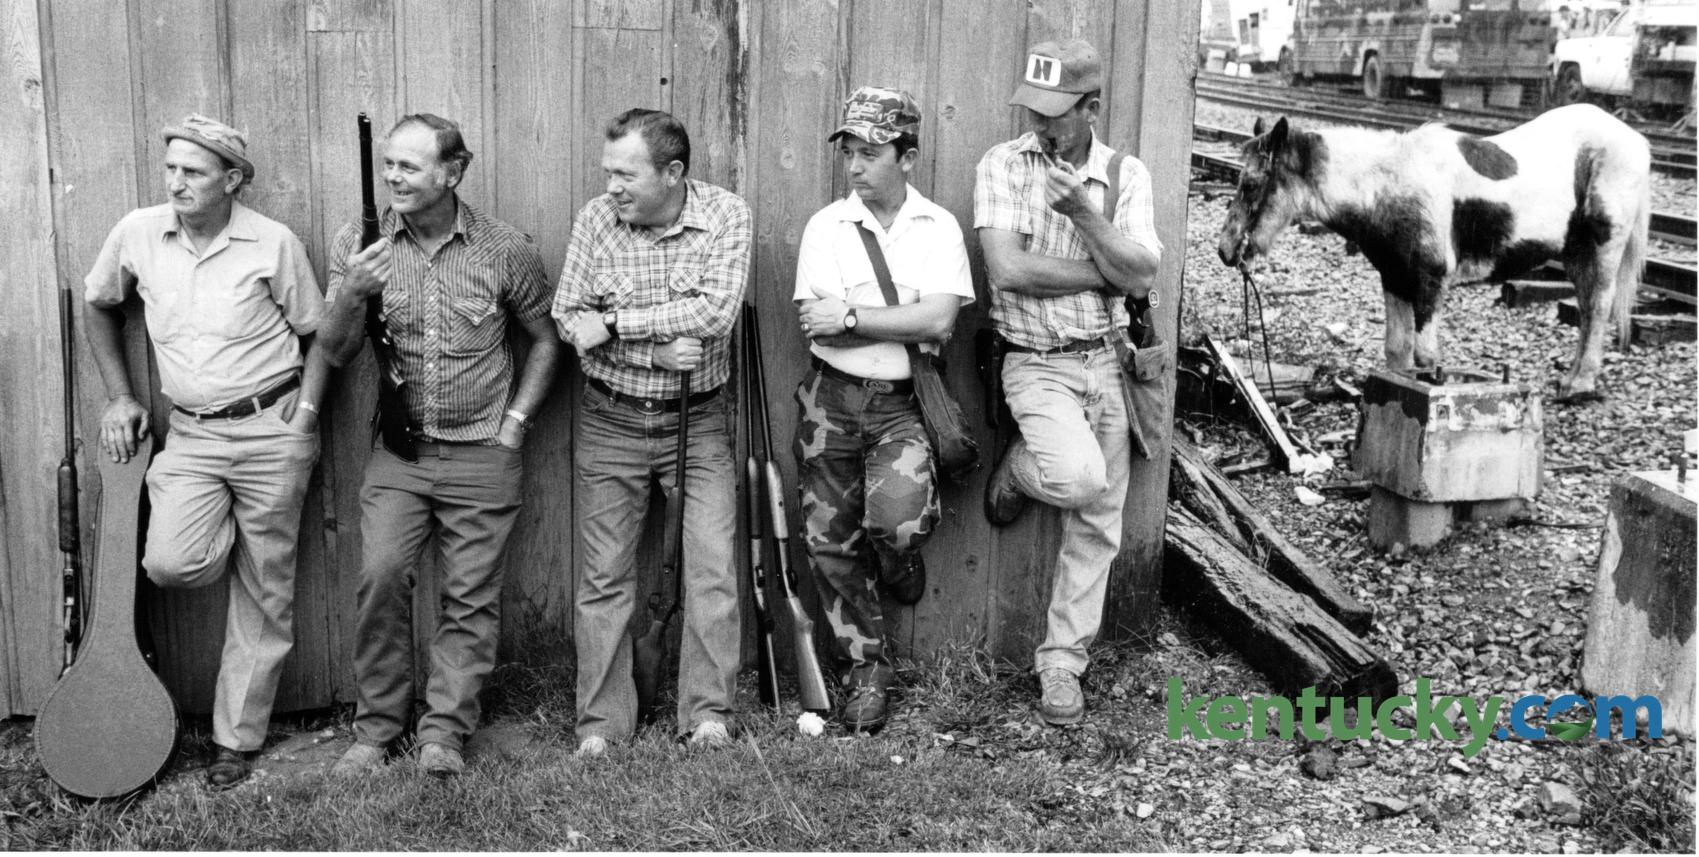 Mount Sterling Court Days 1985 Kentucky Photo Archive